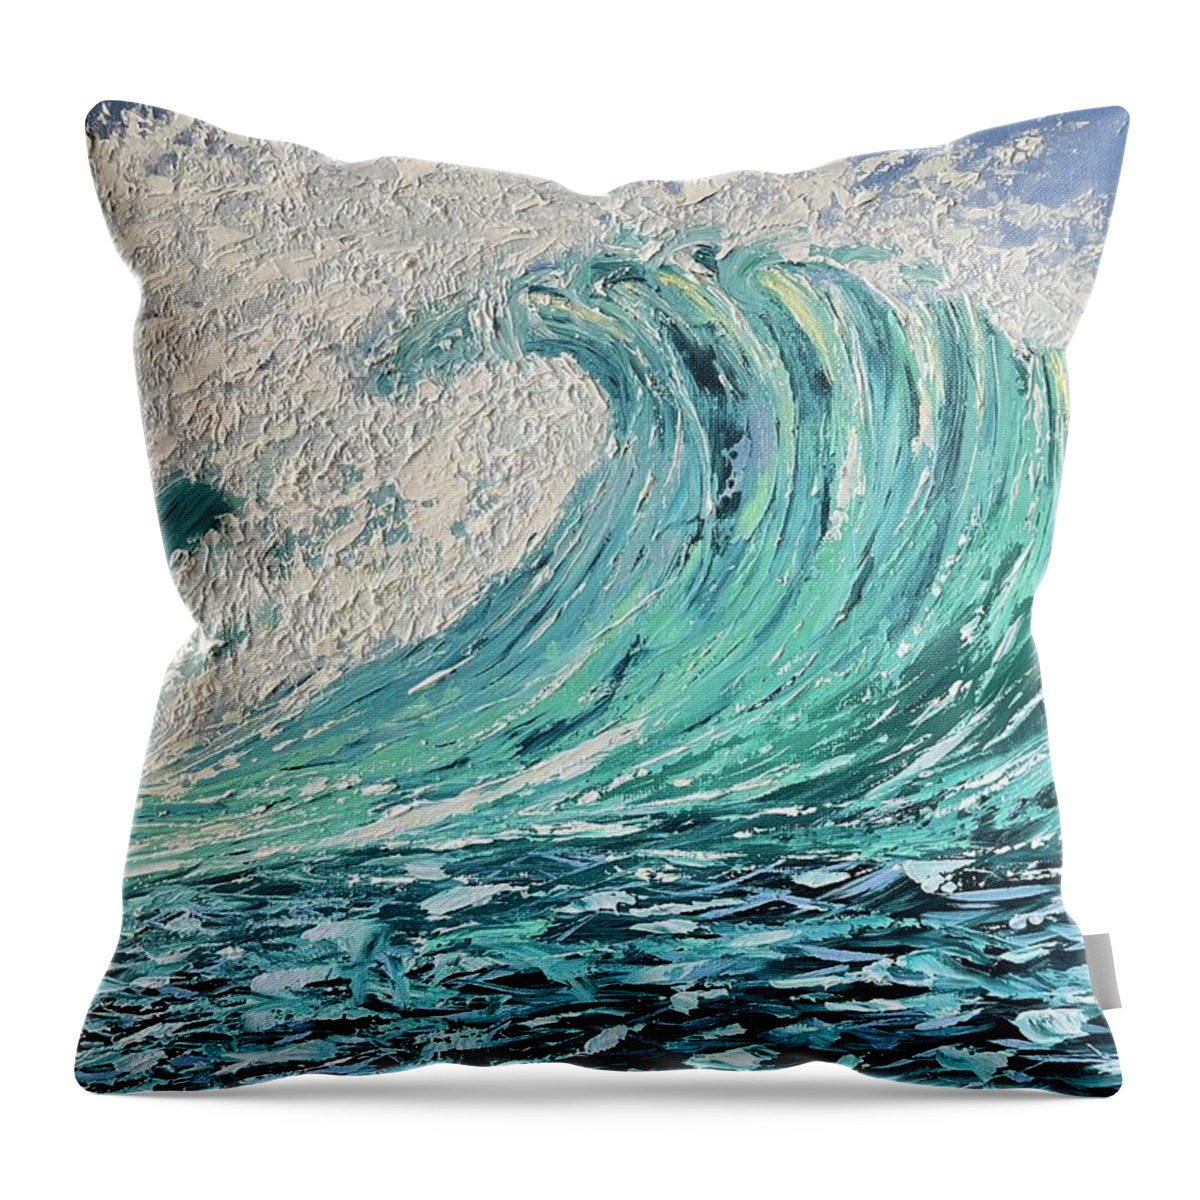 Oil Throw Pillow featuring the painting Caribbean Wave by Lisa White